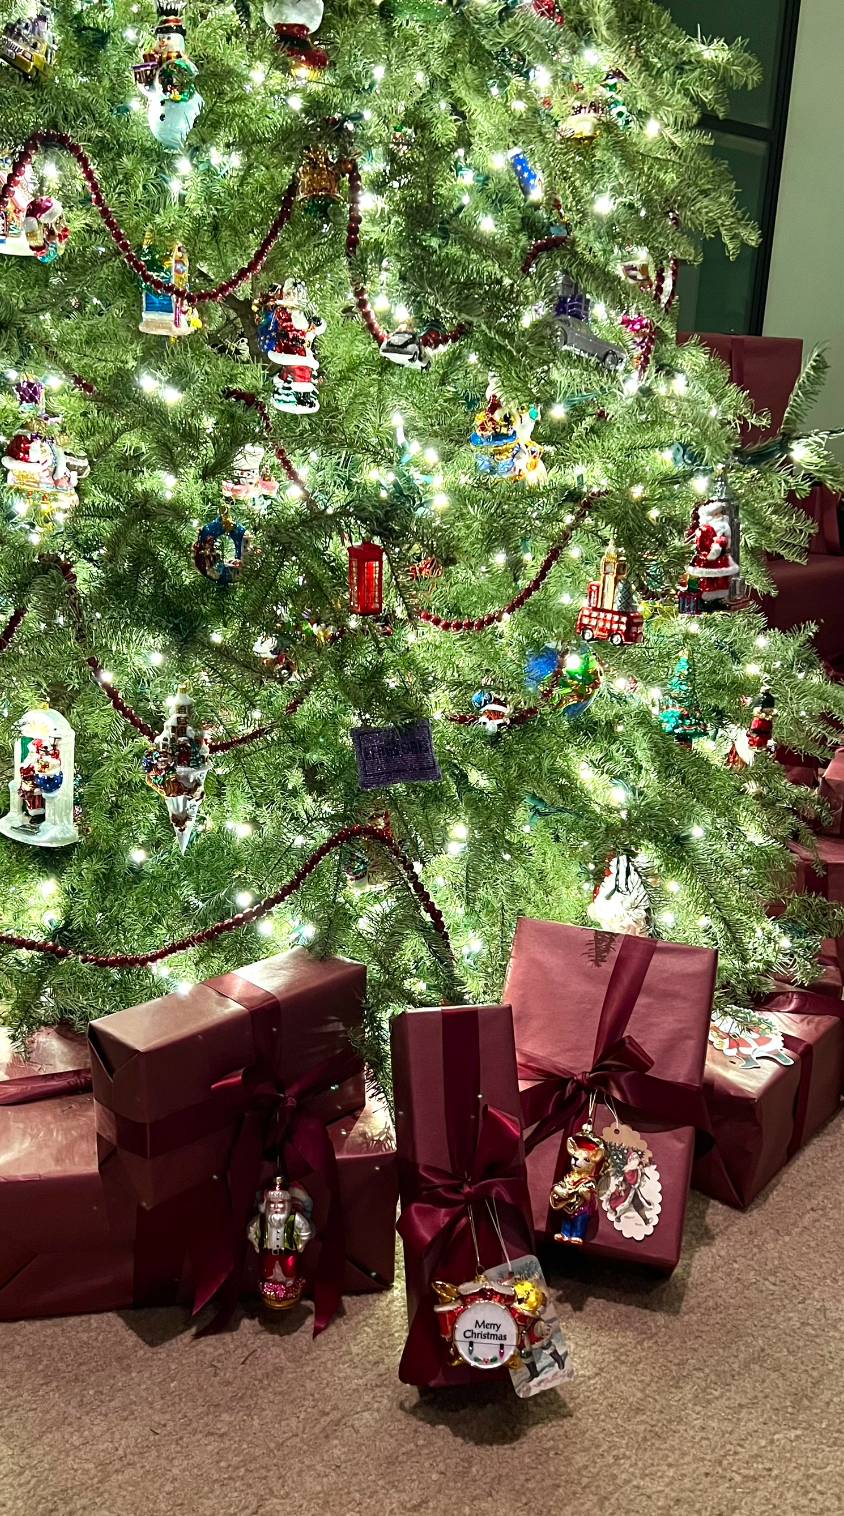 kris jenner wrapped christmas presents under tree 2021